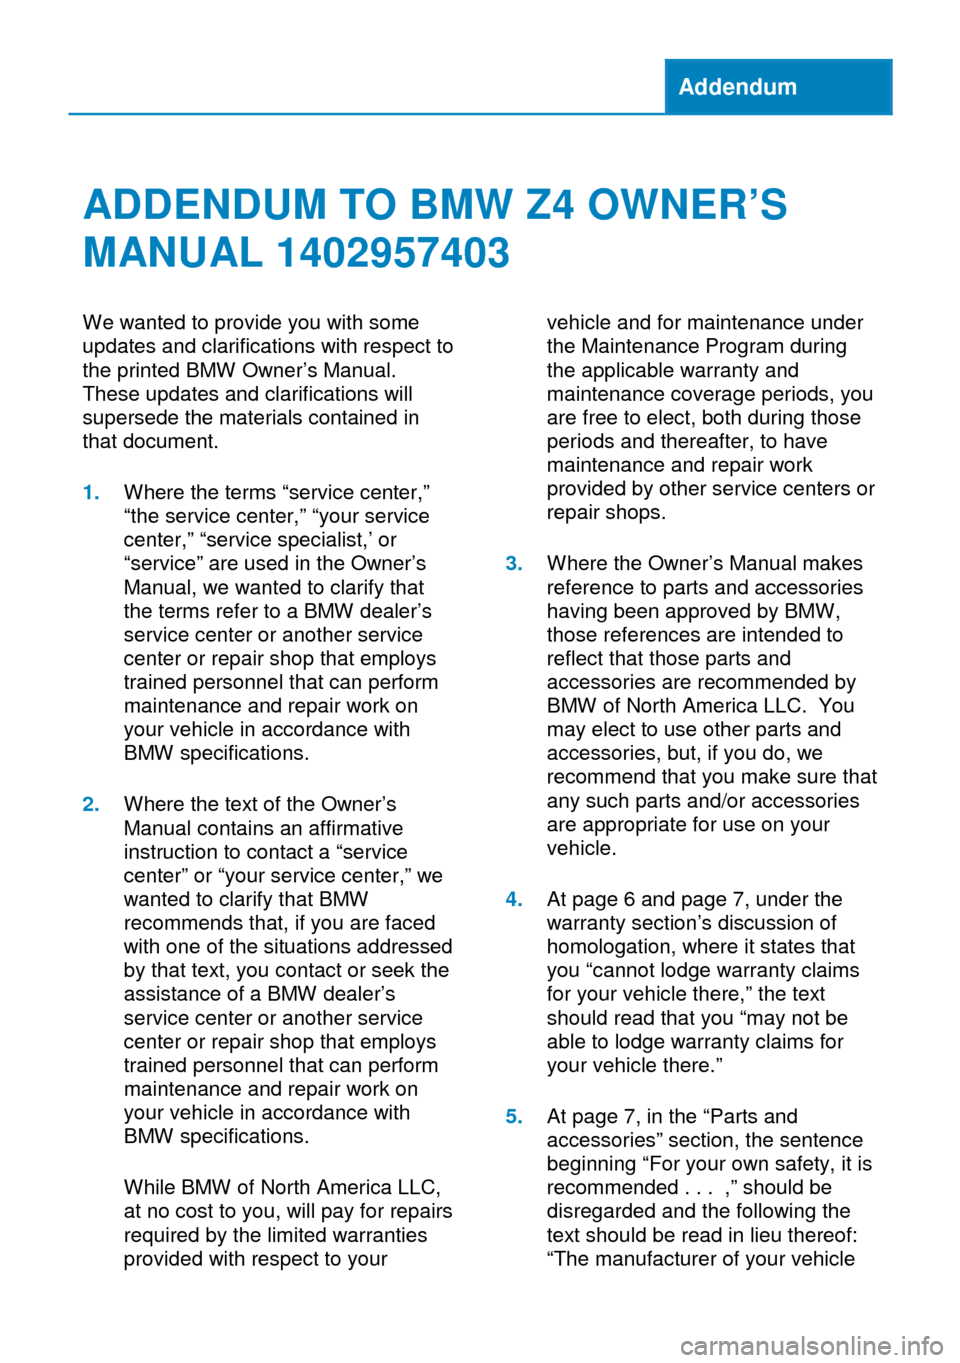 BMW Z4 2014 E89 Owners Manual Addendum
ADDENDUM TO BMW Z4 OWNER’S
MANUAL 1402957403
We wanted to provide you with some
updates and clarifications with respect to
the printed BMW Owner’s Manual.
These updates and clarifications